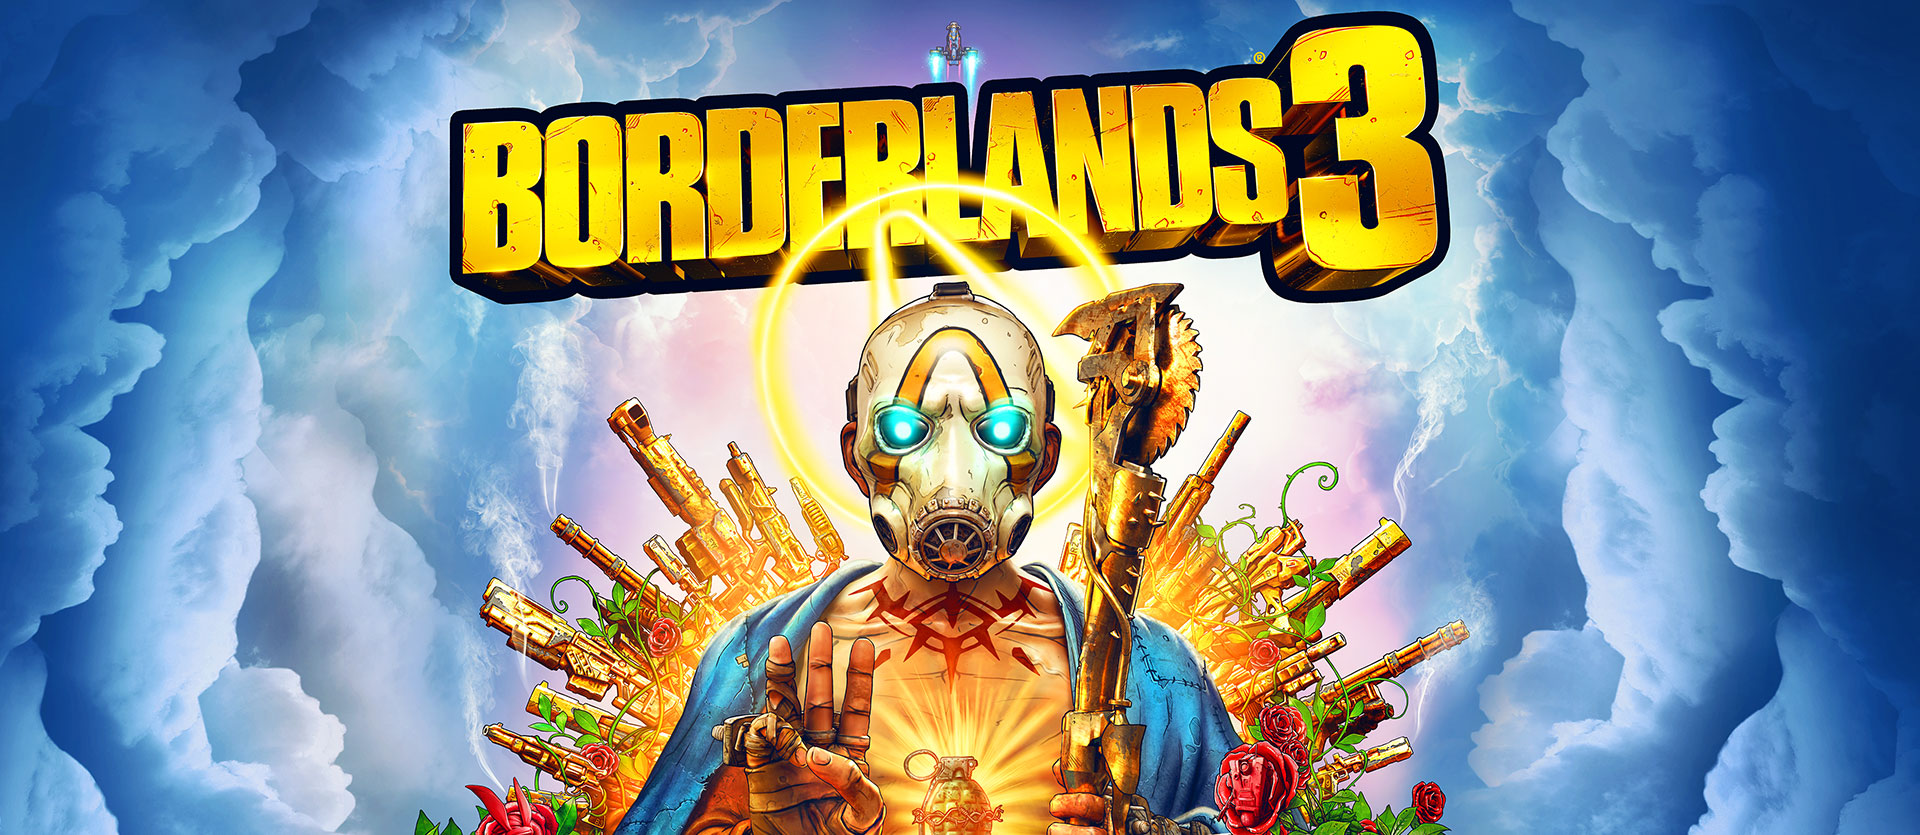 borderlands game of the year xbox store